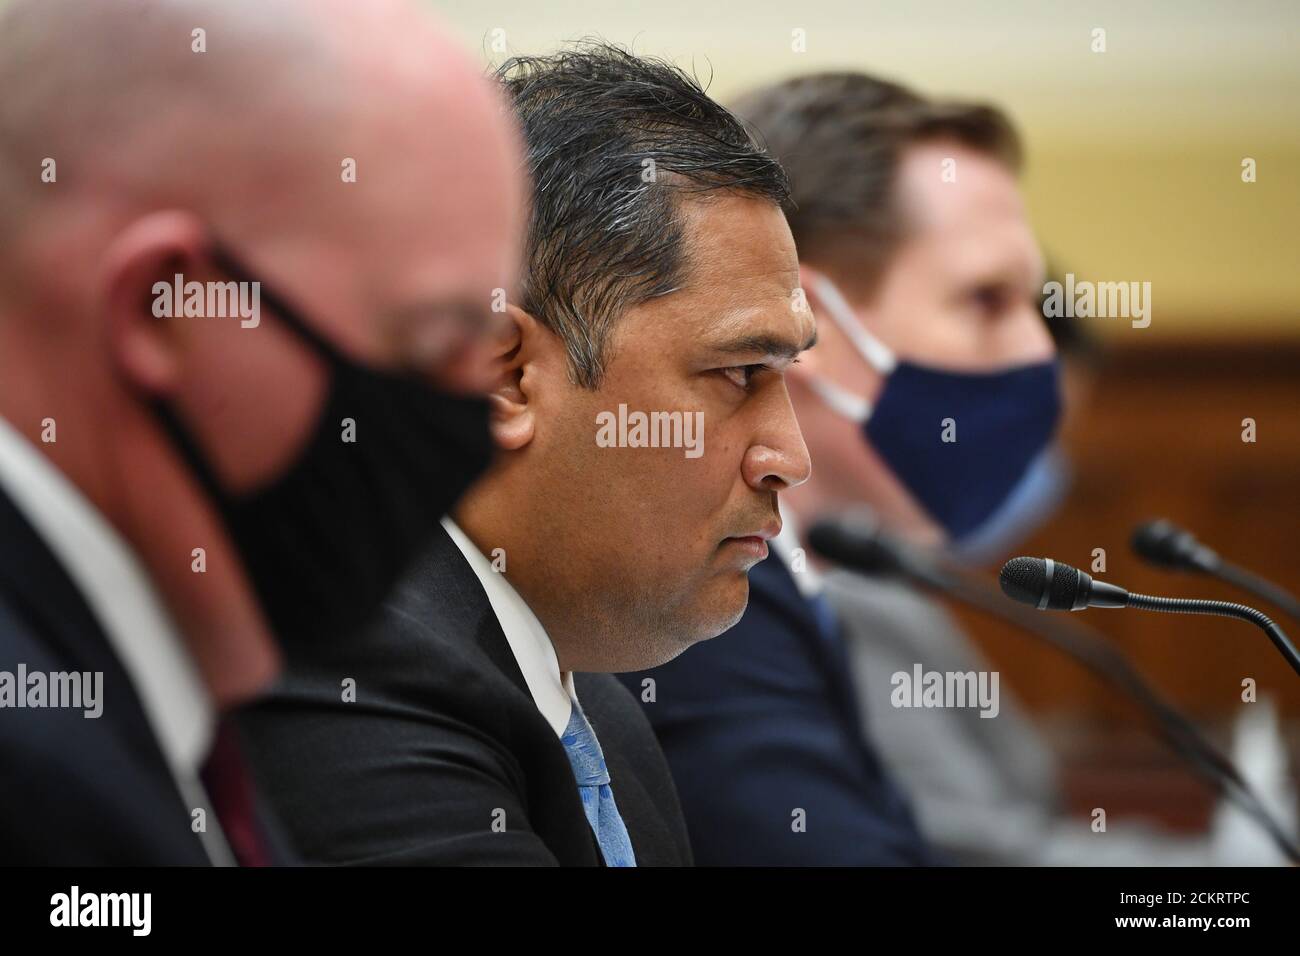 Washington, United States. 16th Sep, 2020. R. Clarke Cooper (L), Assistant Secretary of State for Political-Military Affairs, Brian Bulatao (C), Under Secretary of State for Management, and Marik String, Acting Legal Adviser for the State Department, testify before a House Committee on Foreign Affairs hearing looking into the firing of State Department Inspector General Steven Linick, on Capitol Hill in Washington, DC on Wednesday, September 16, 2020. Photo by Kevin Dietsch/UPI Credit: UPI/Alamy Live News Stock Photo